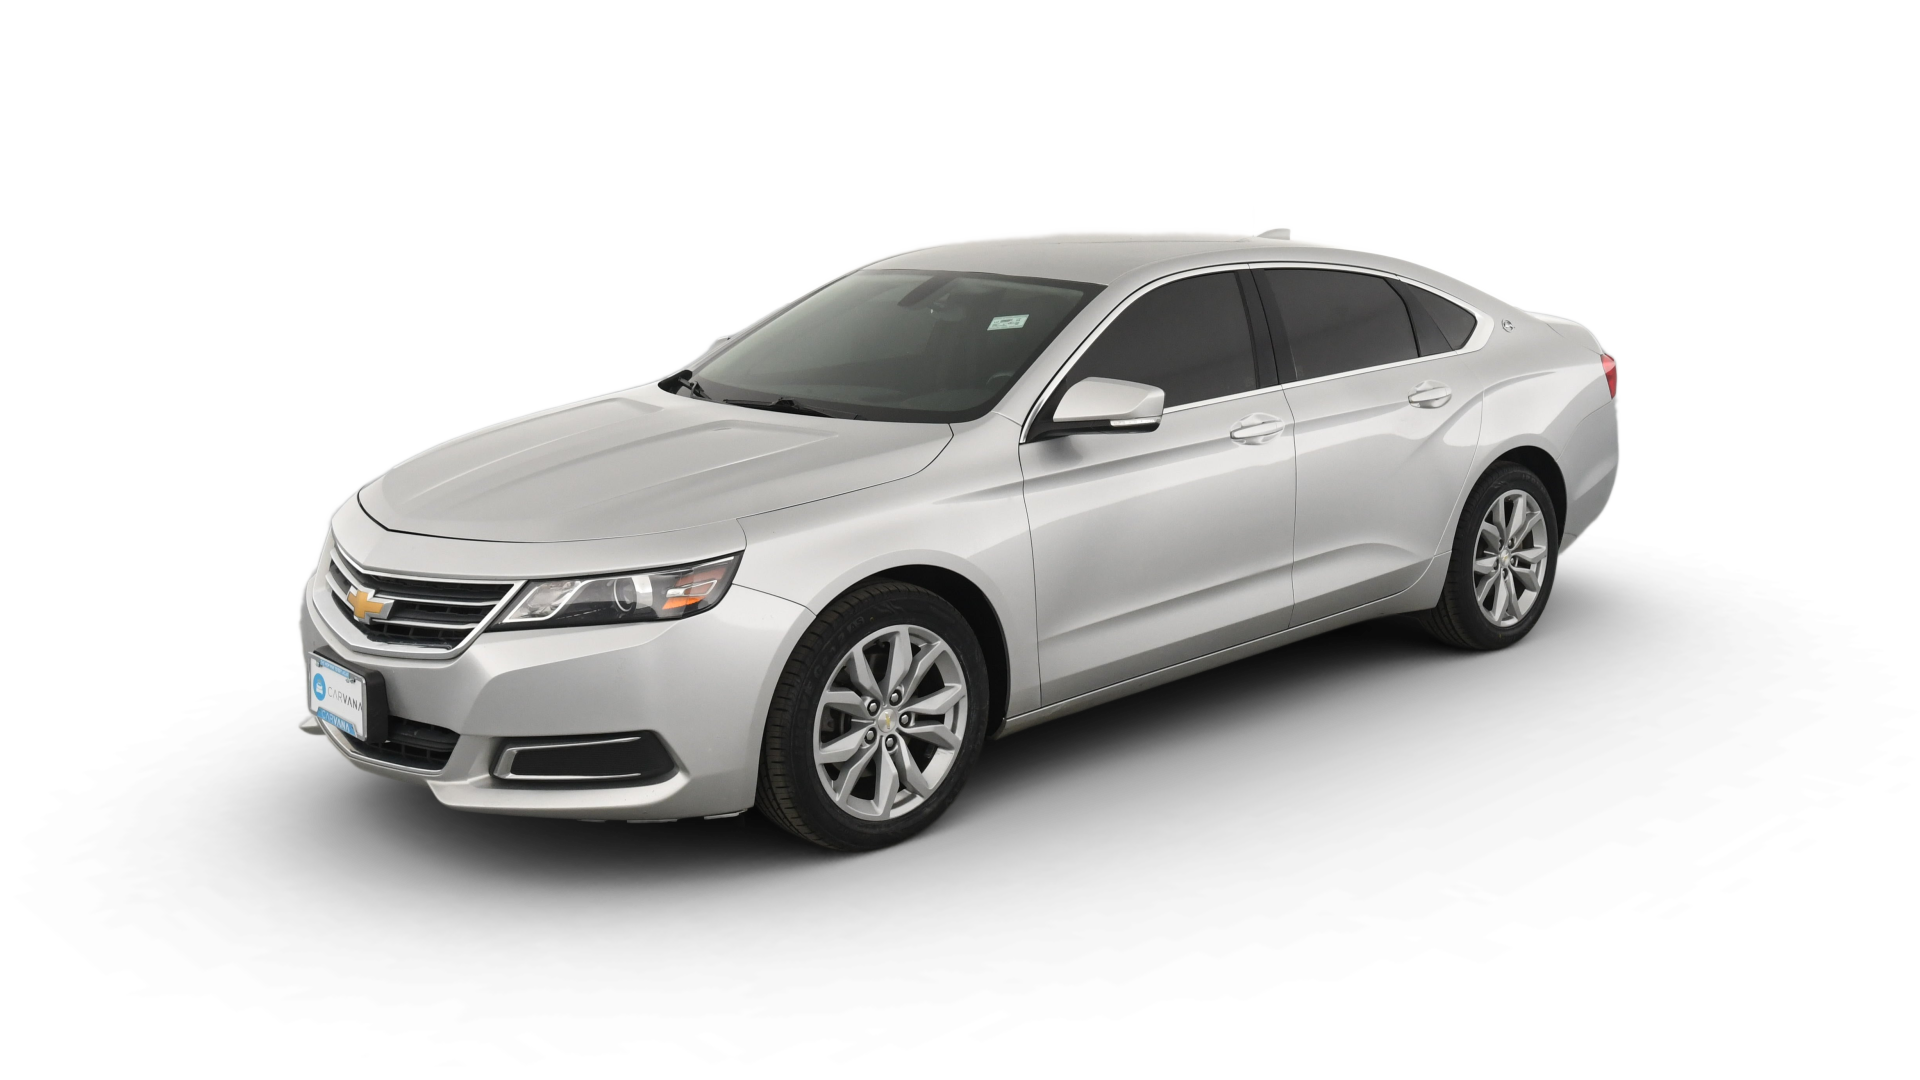 Used 2017 Chevrolet Impala For Sale Online | Carvana